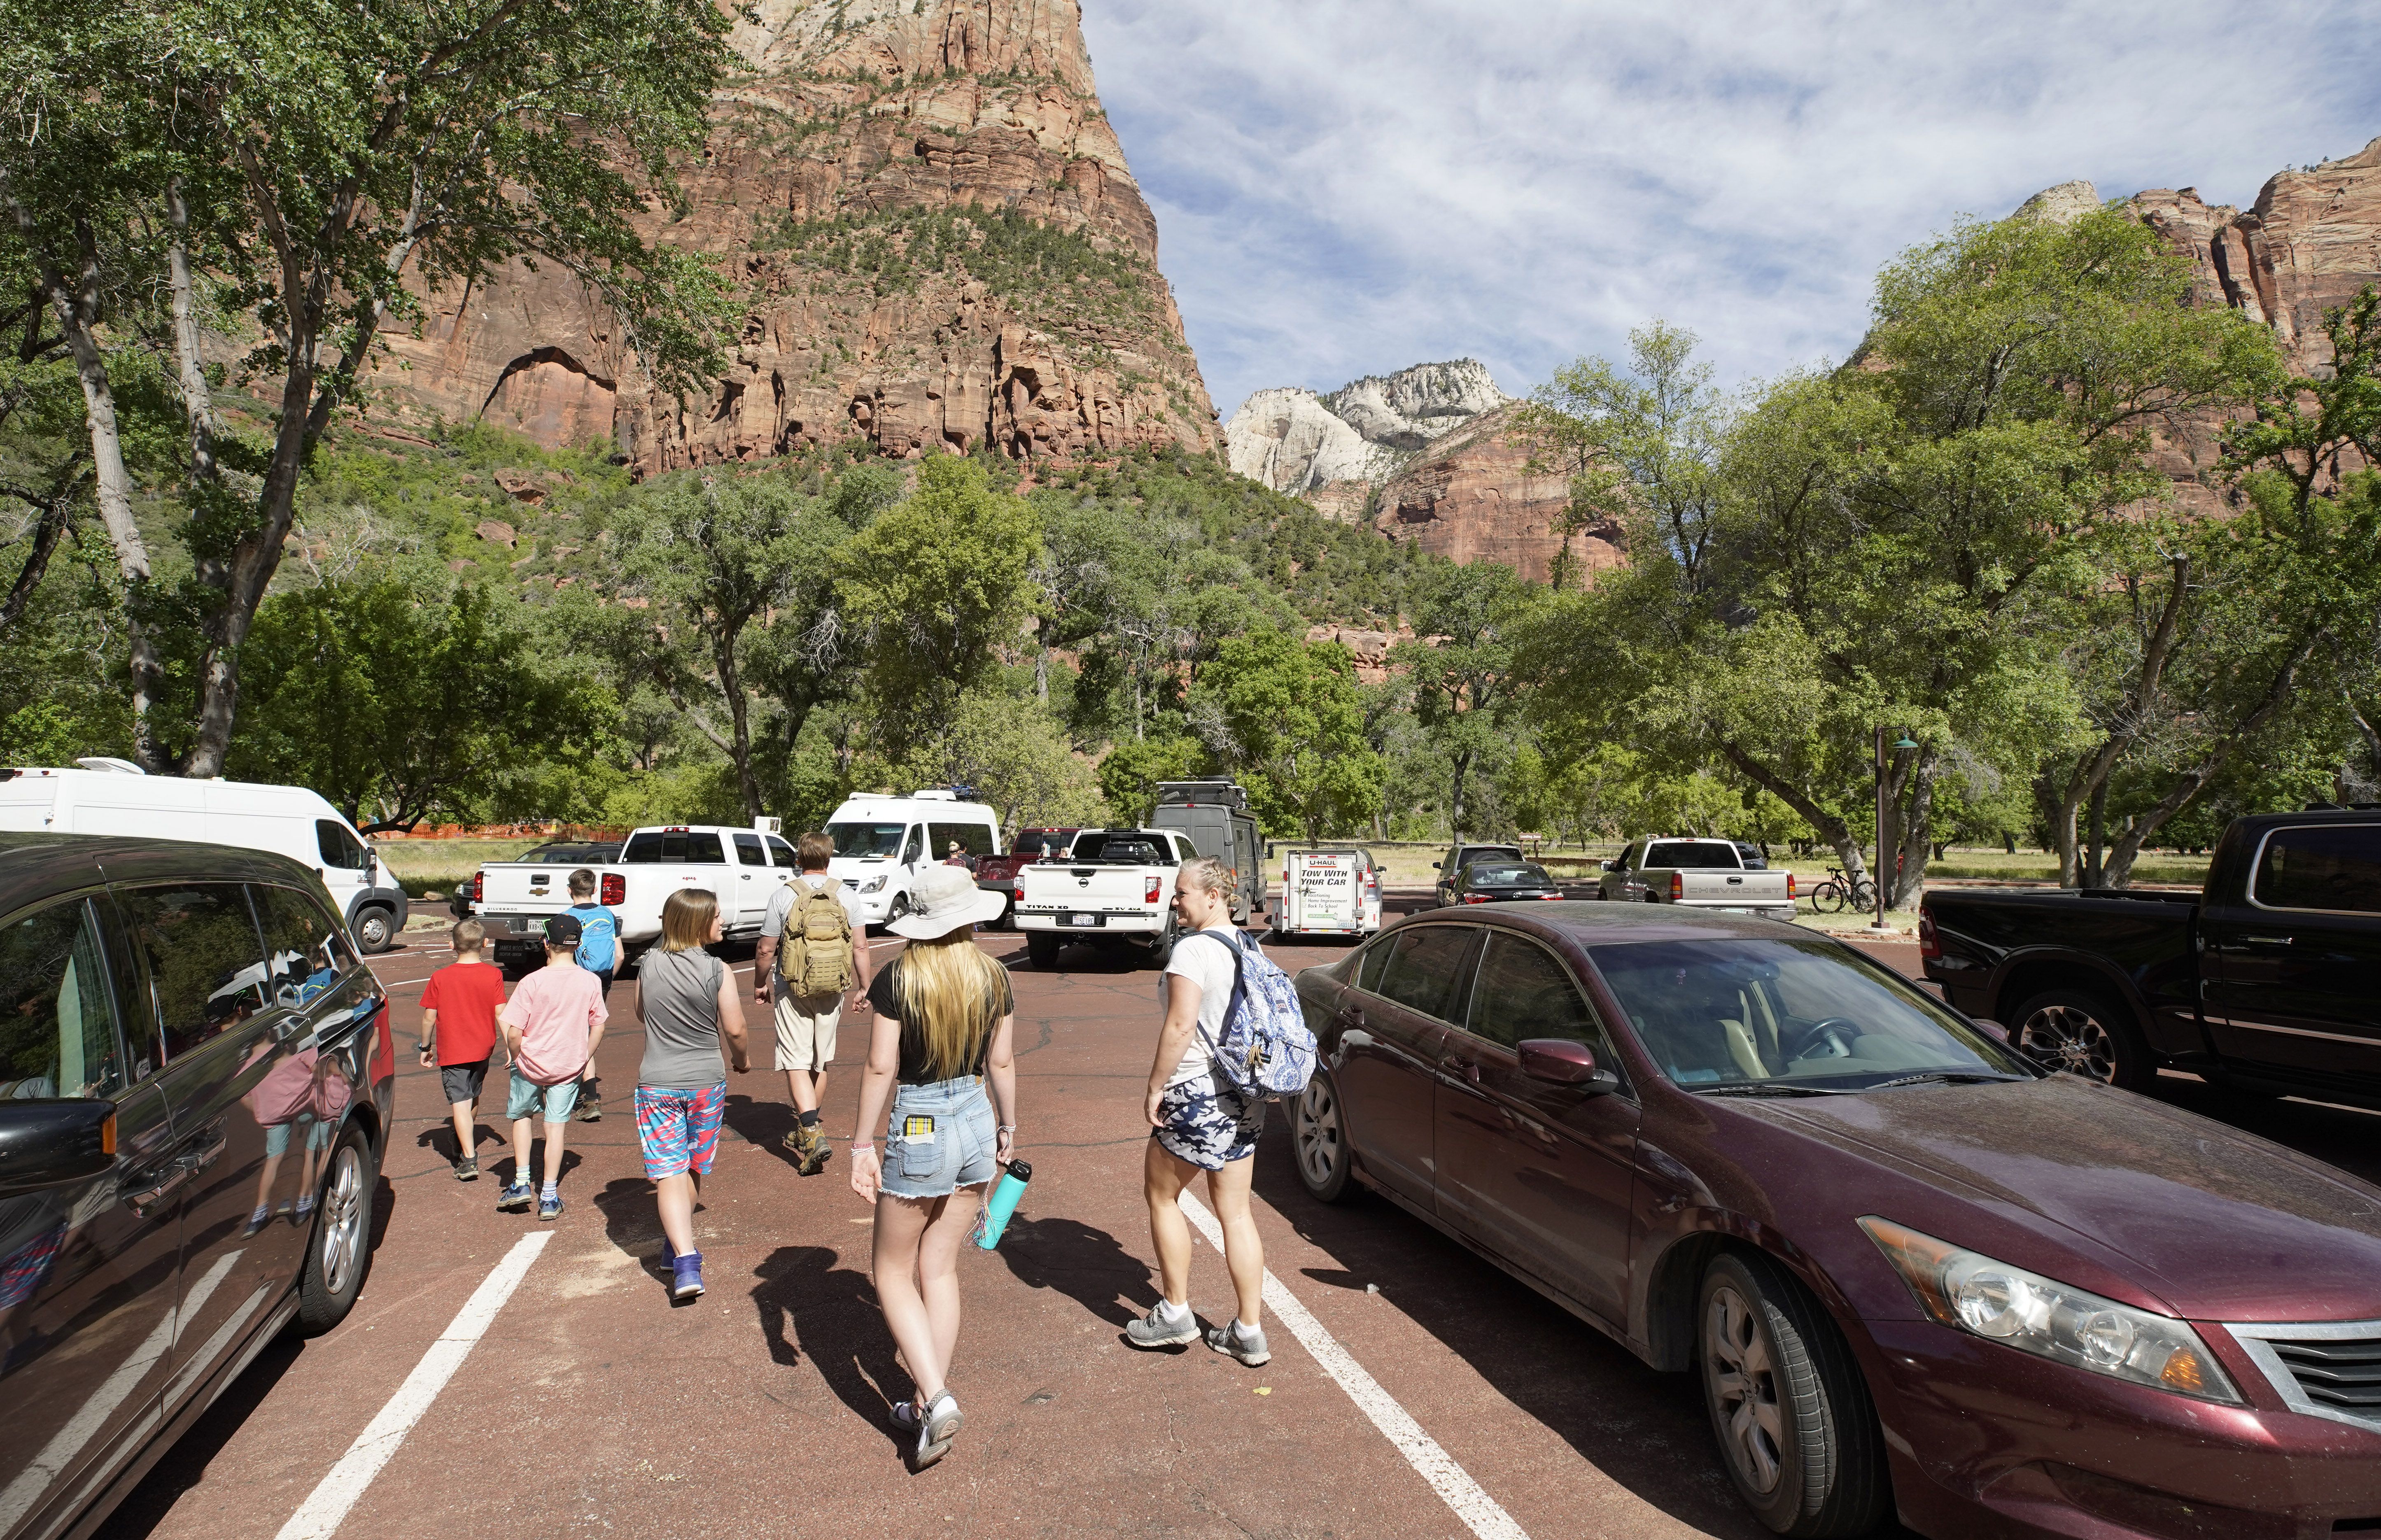 In this image, a group of people walk through a parking lot with a canyon in the background